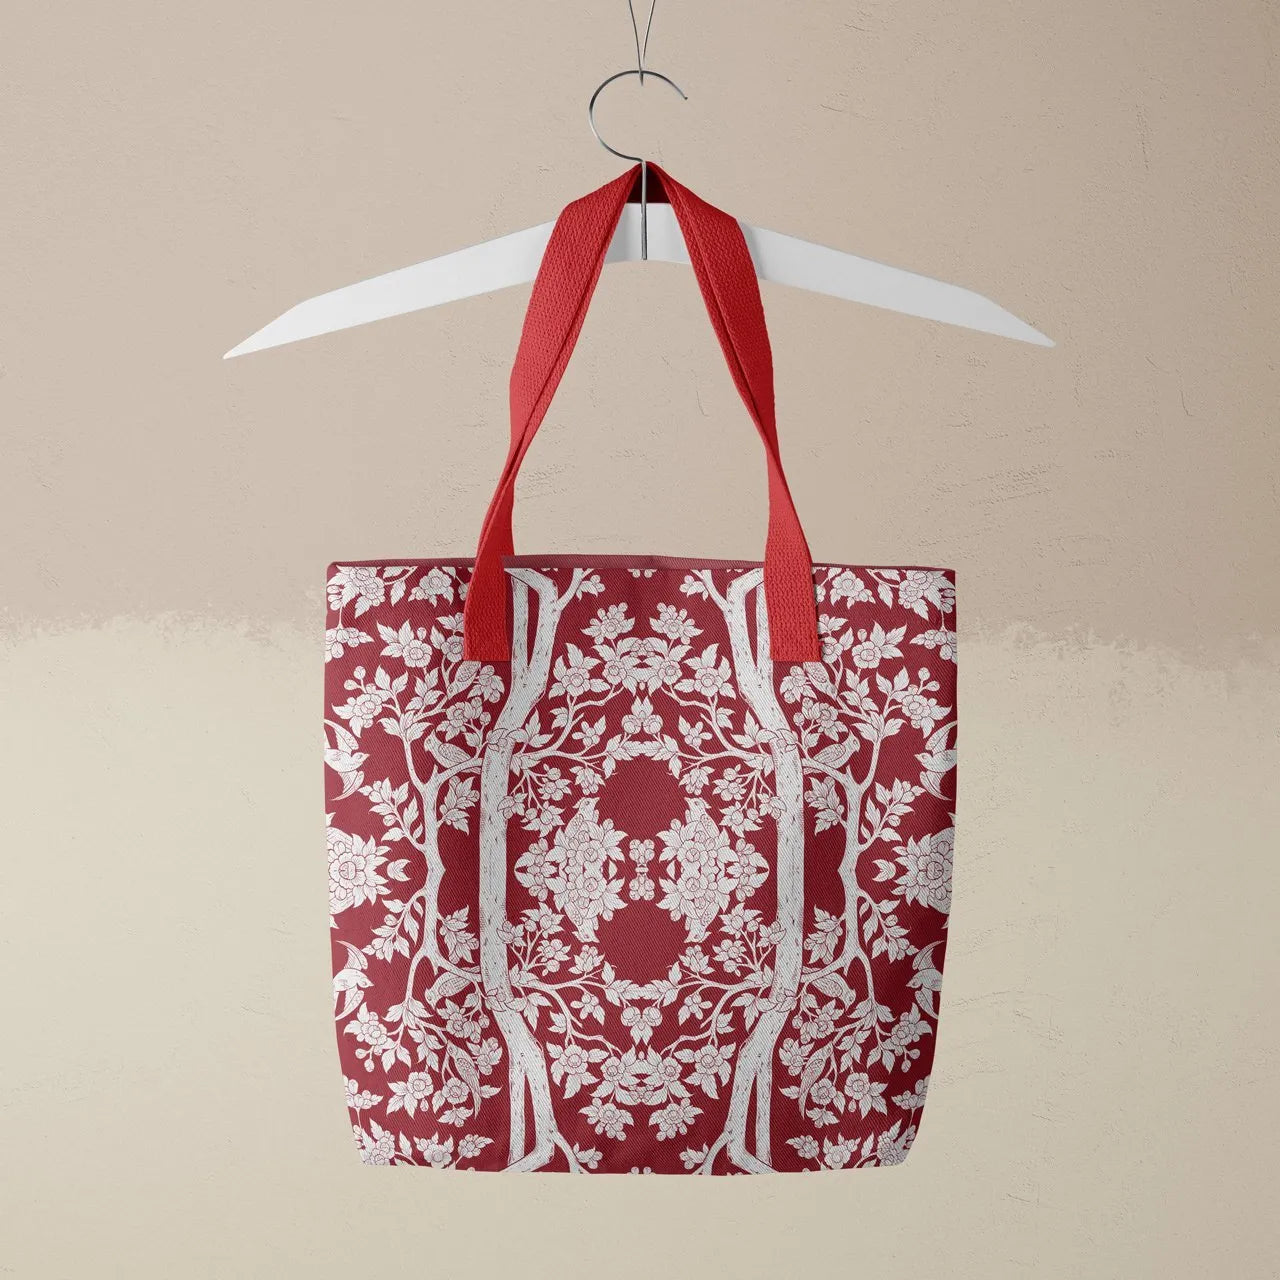 Aviary Tote - Rosella - Heavy Duty Reusable Grocery Bag - Red Handles - Shopping Totes - Aesthetic Art